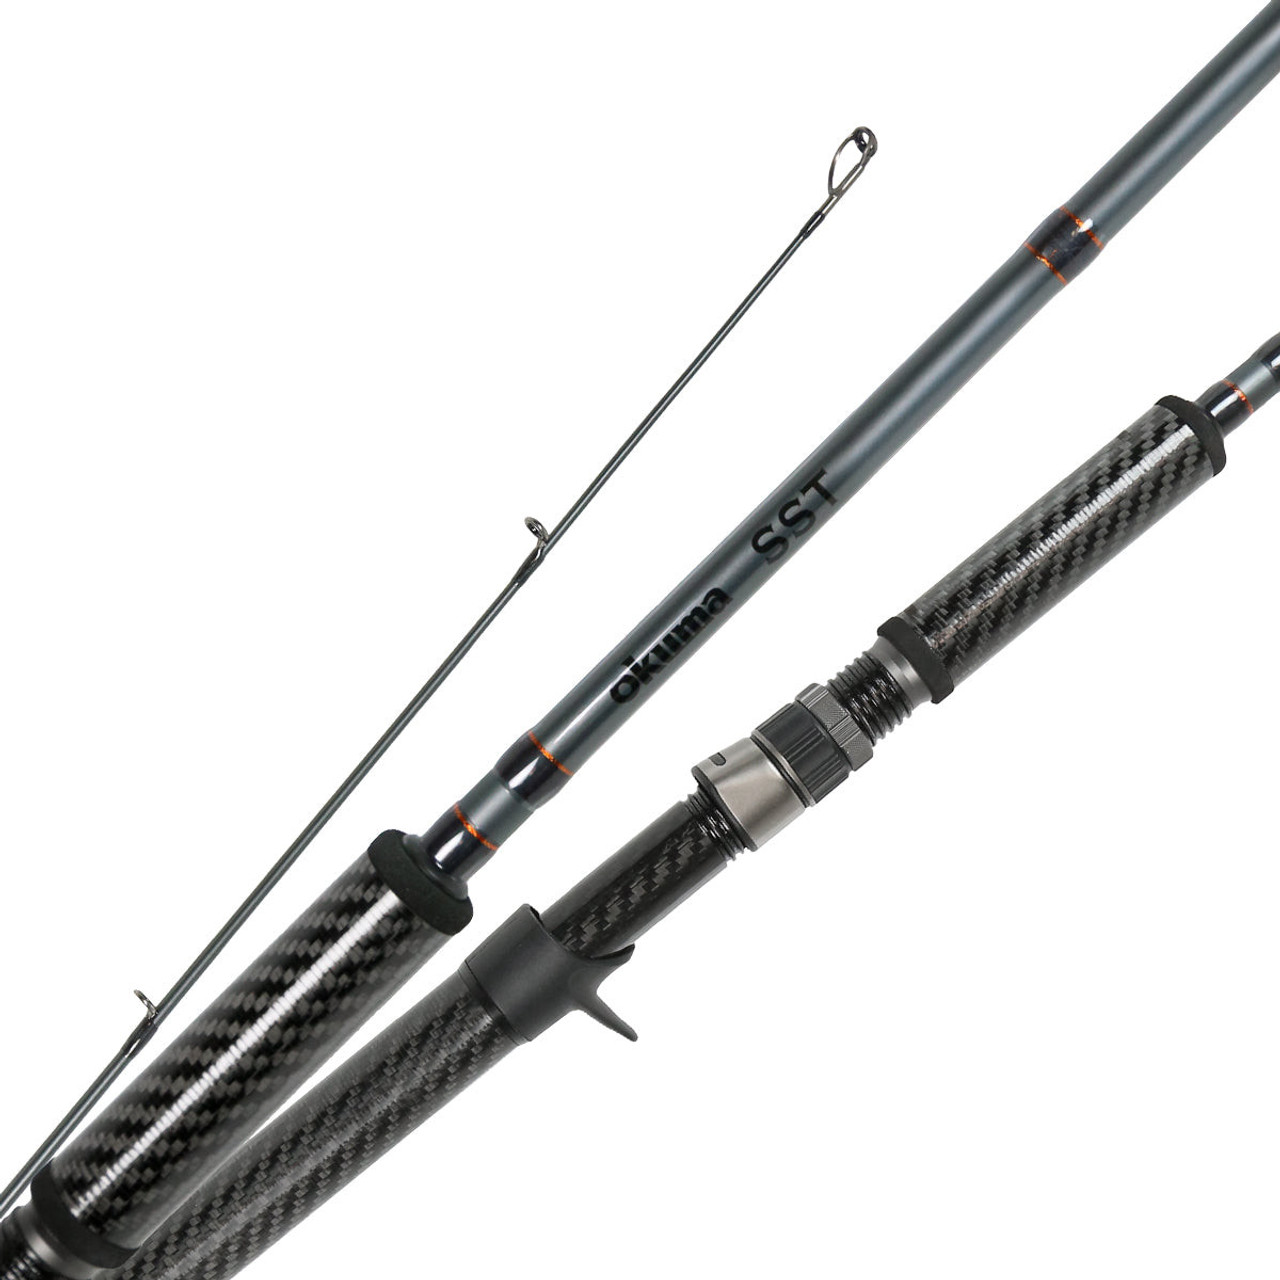 Okuma SST New generation SST Fishing rod with carbon grips M 8-17LB 10'6  2PC SPIN CP-5